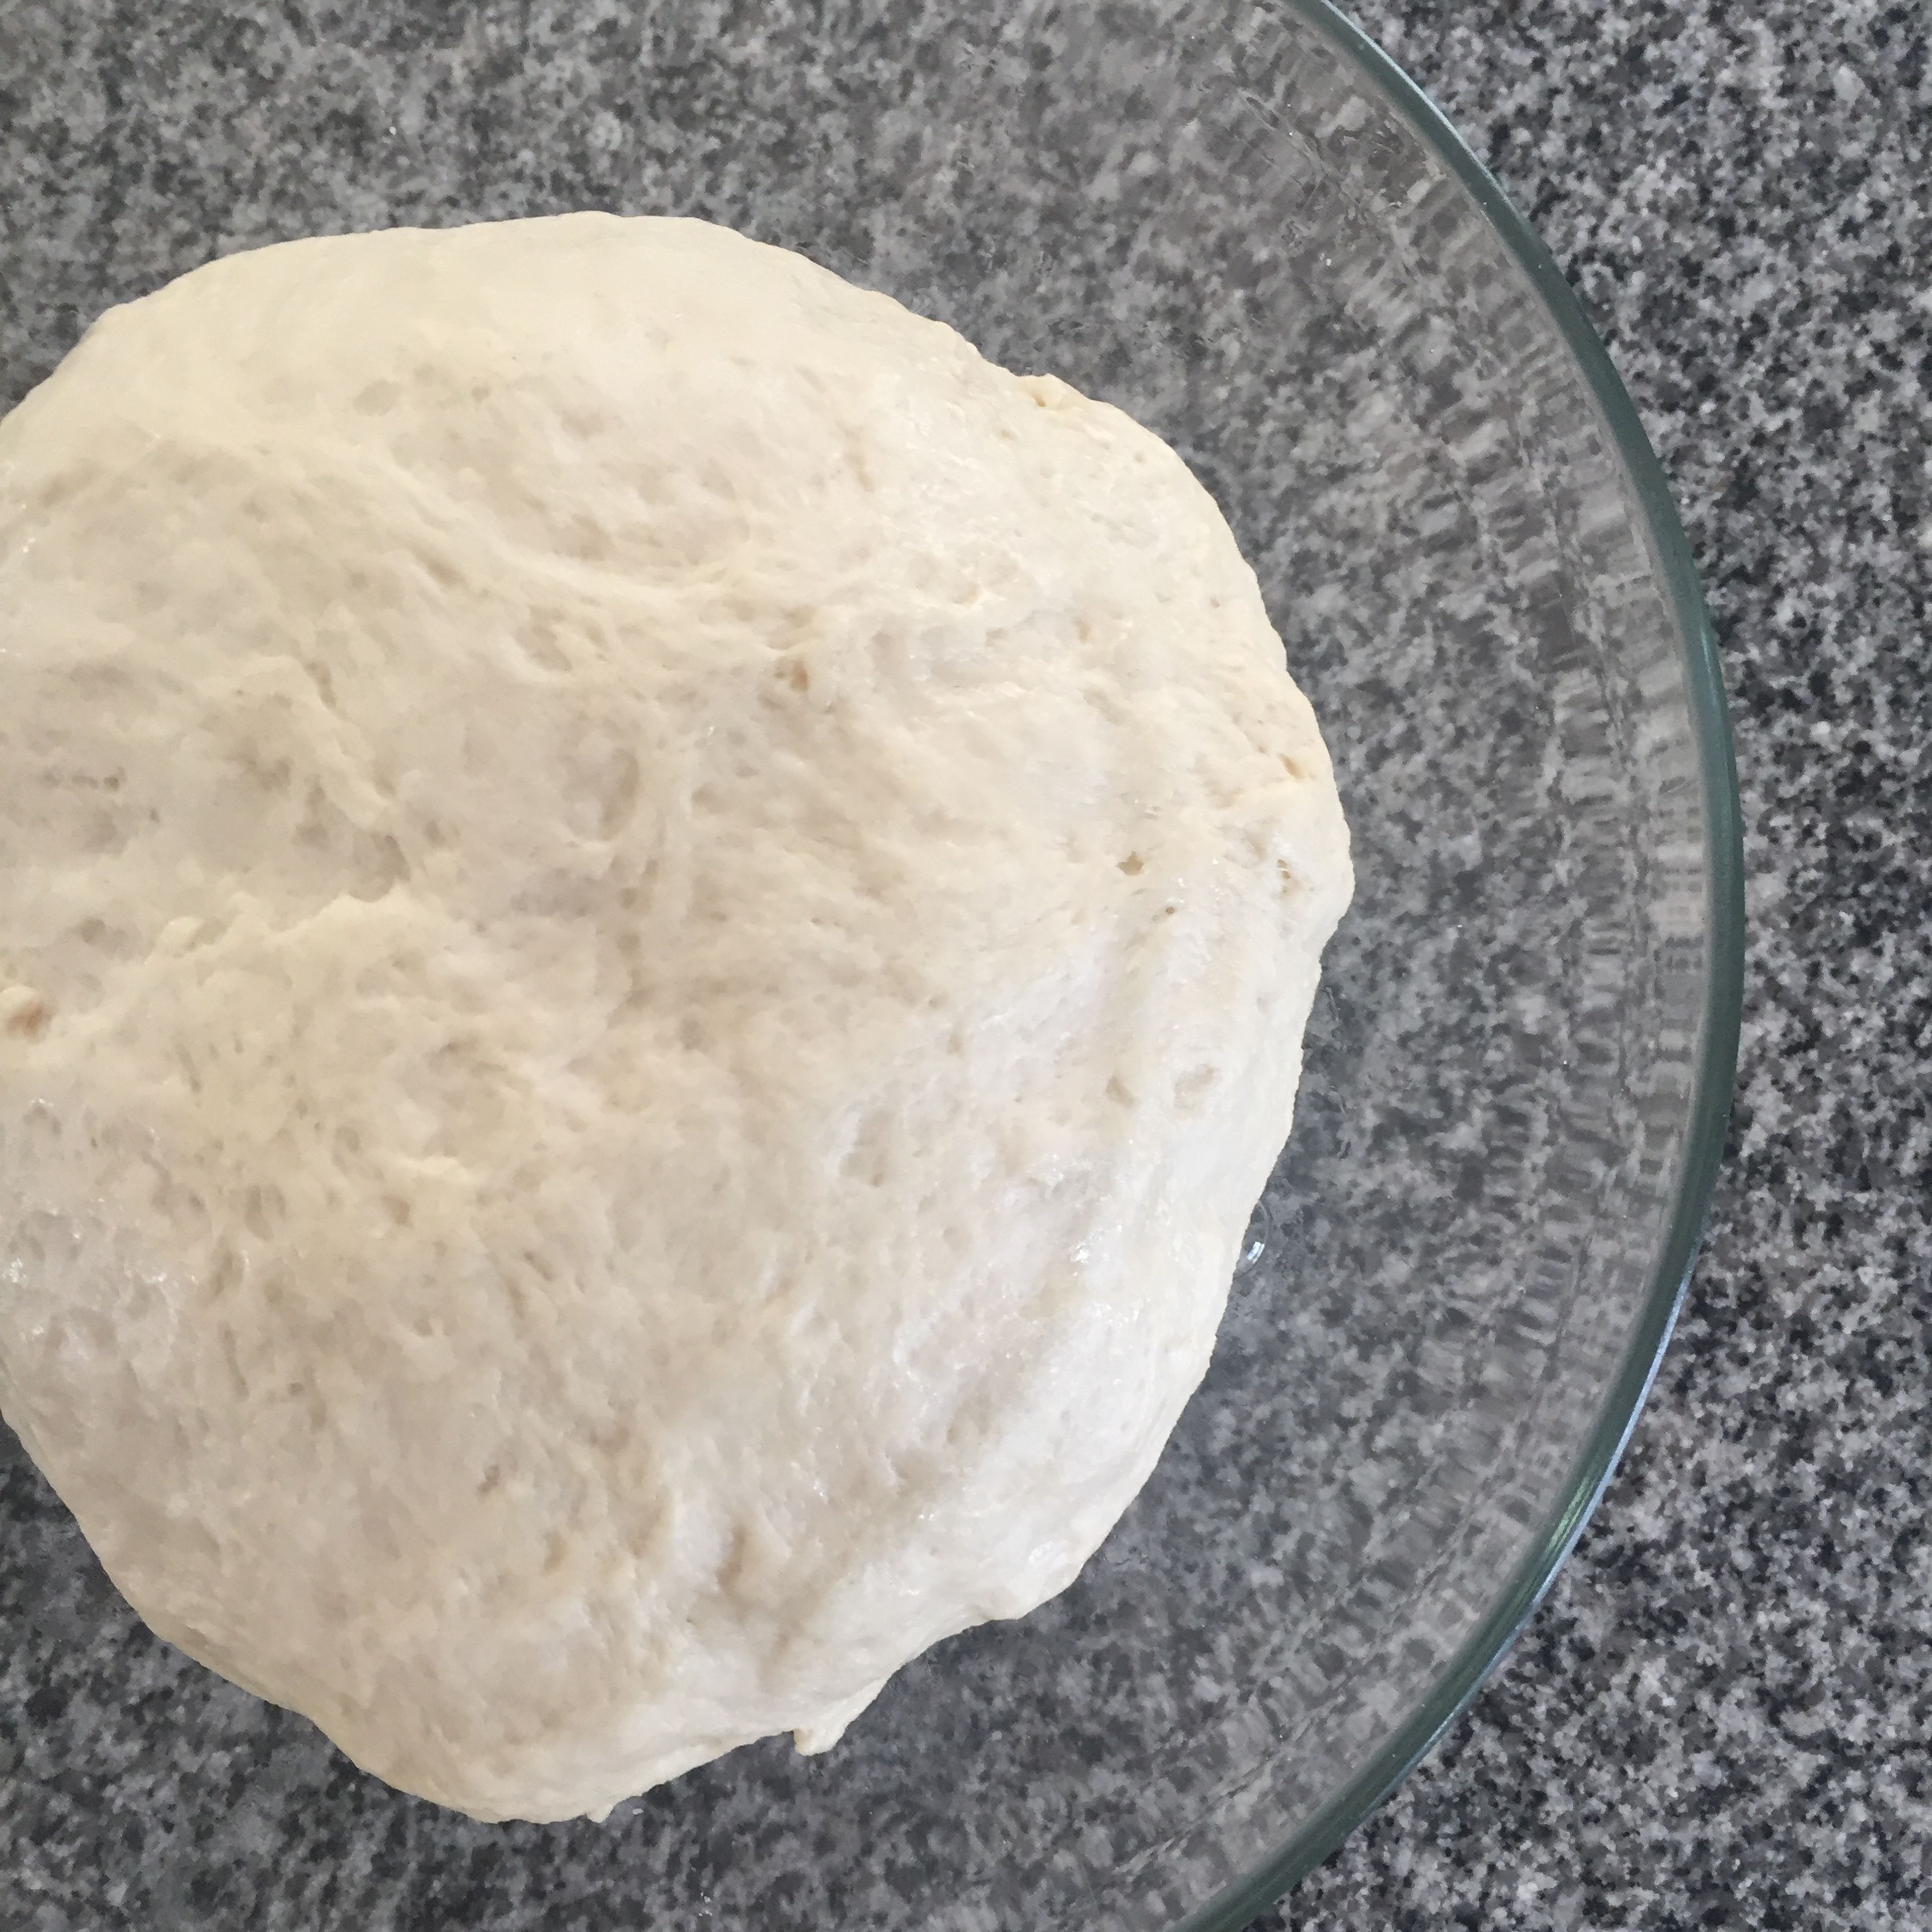 after thirty minutes, the dough should have risen to about double it’s size. Punch and knead for a few minutes, then set to rise for ten minutes.